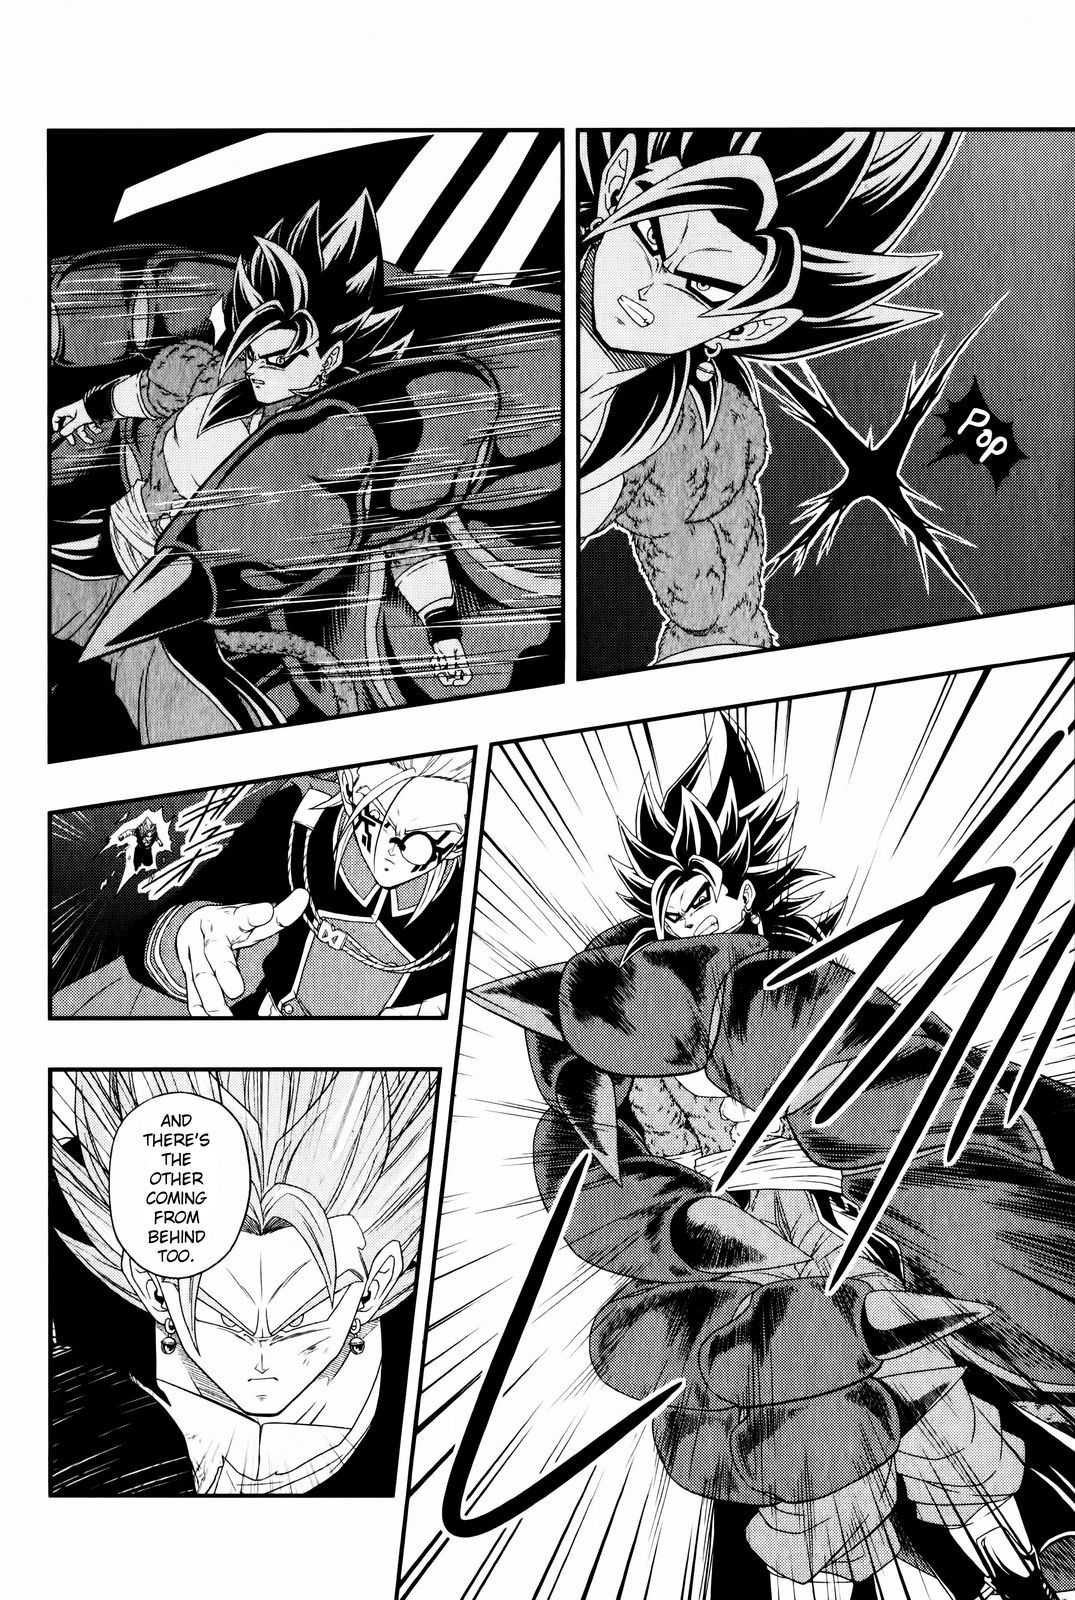 Dragon Grievous on X: Here are some panels from Super Dragon Ball Heroes  Big Bang Mission Manga Chapter 13. #DragonBall #DragonBallZ #DragonBallGT  #DagonBallSuper #DragonBallHeroes #SuperDragonBallHeroes   / X